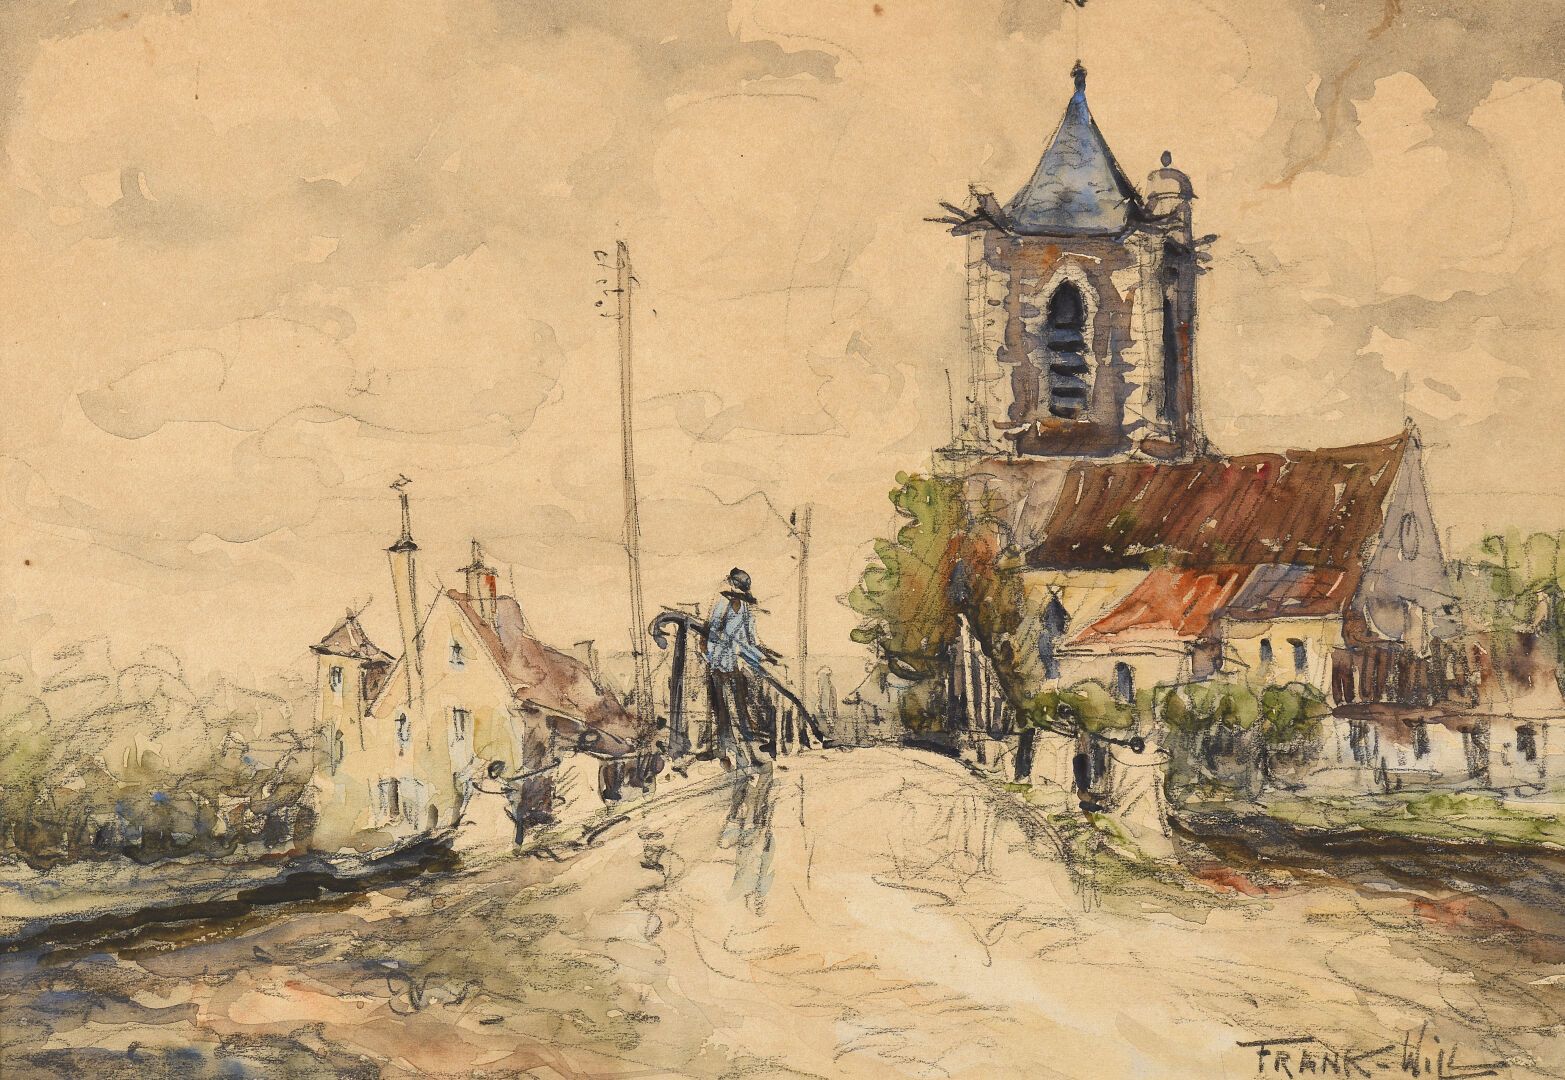 Null FRANK-WILL (1900-1951)
Village Street
Pencil and watercolor on paper, signe&hellip;